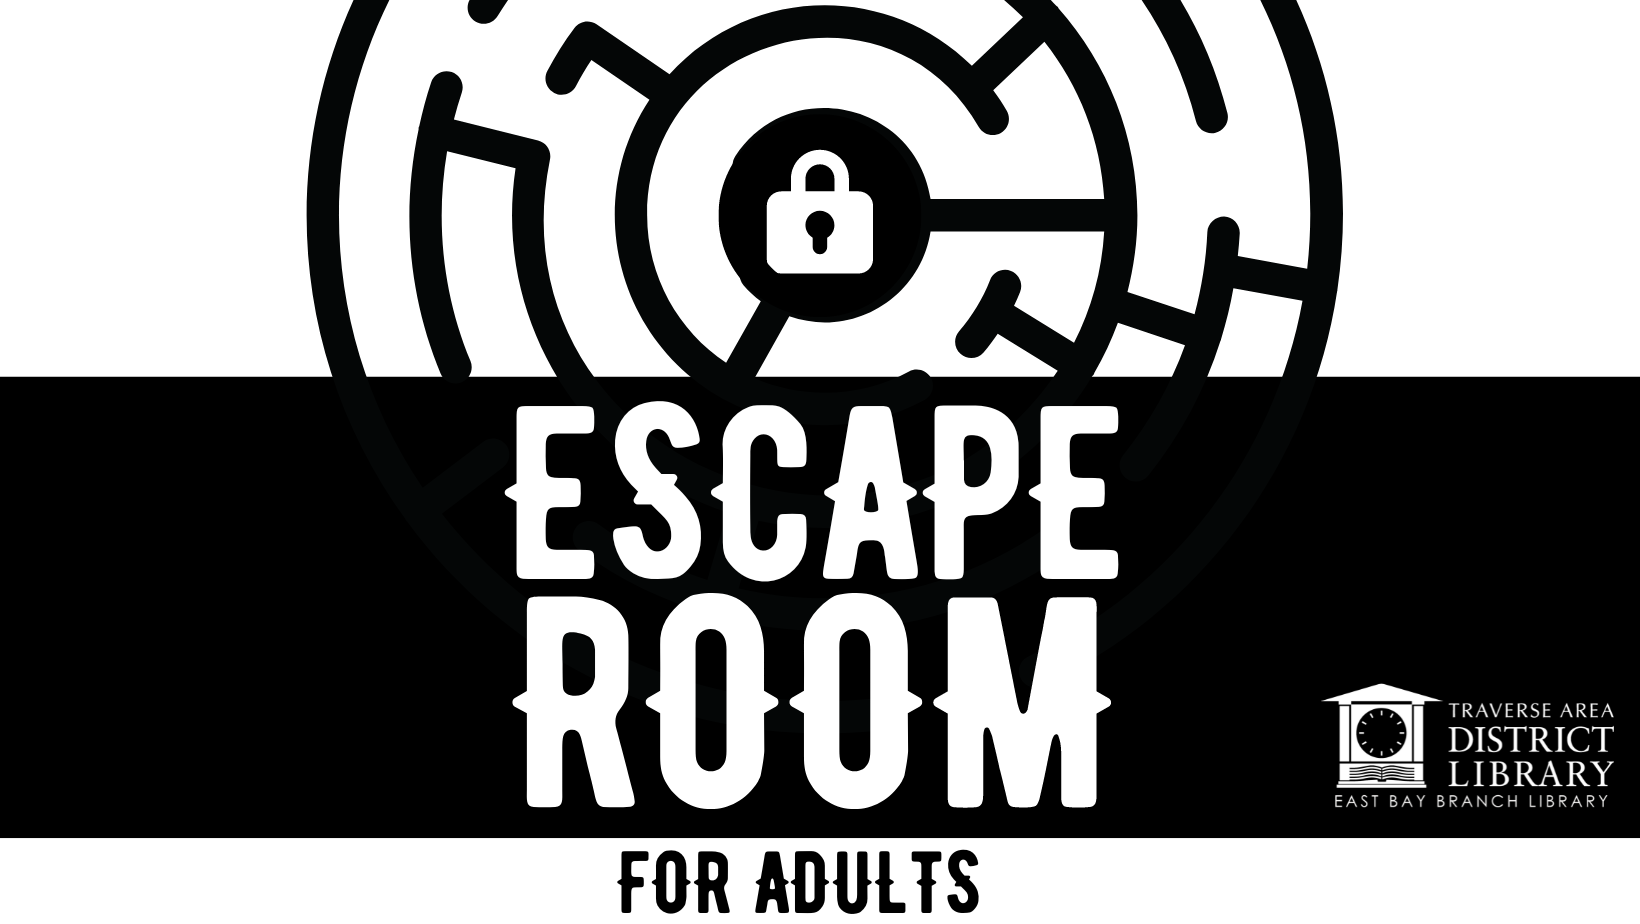 Escape Room For Adults with maze and lock symbol